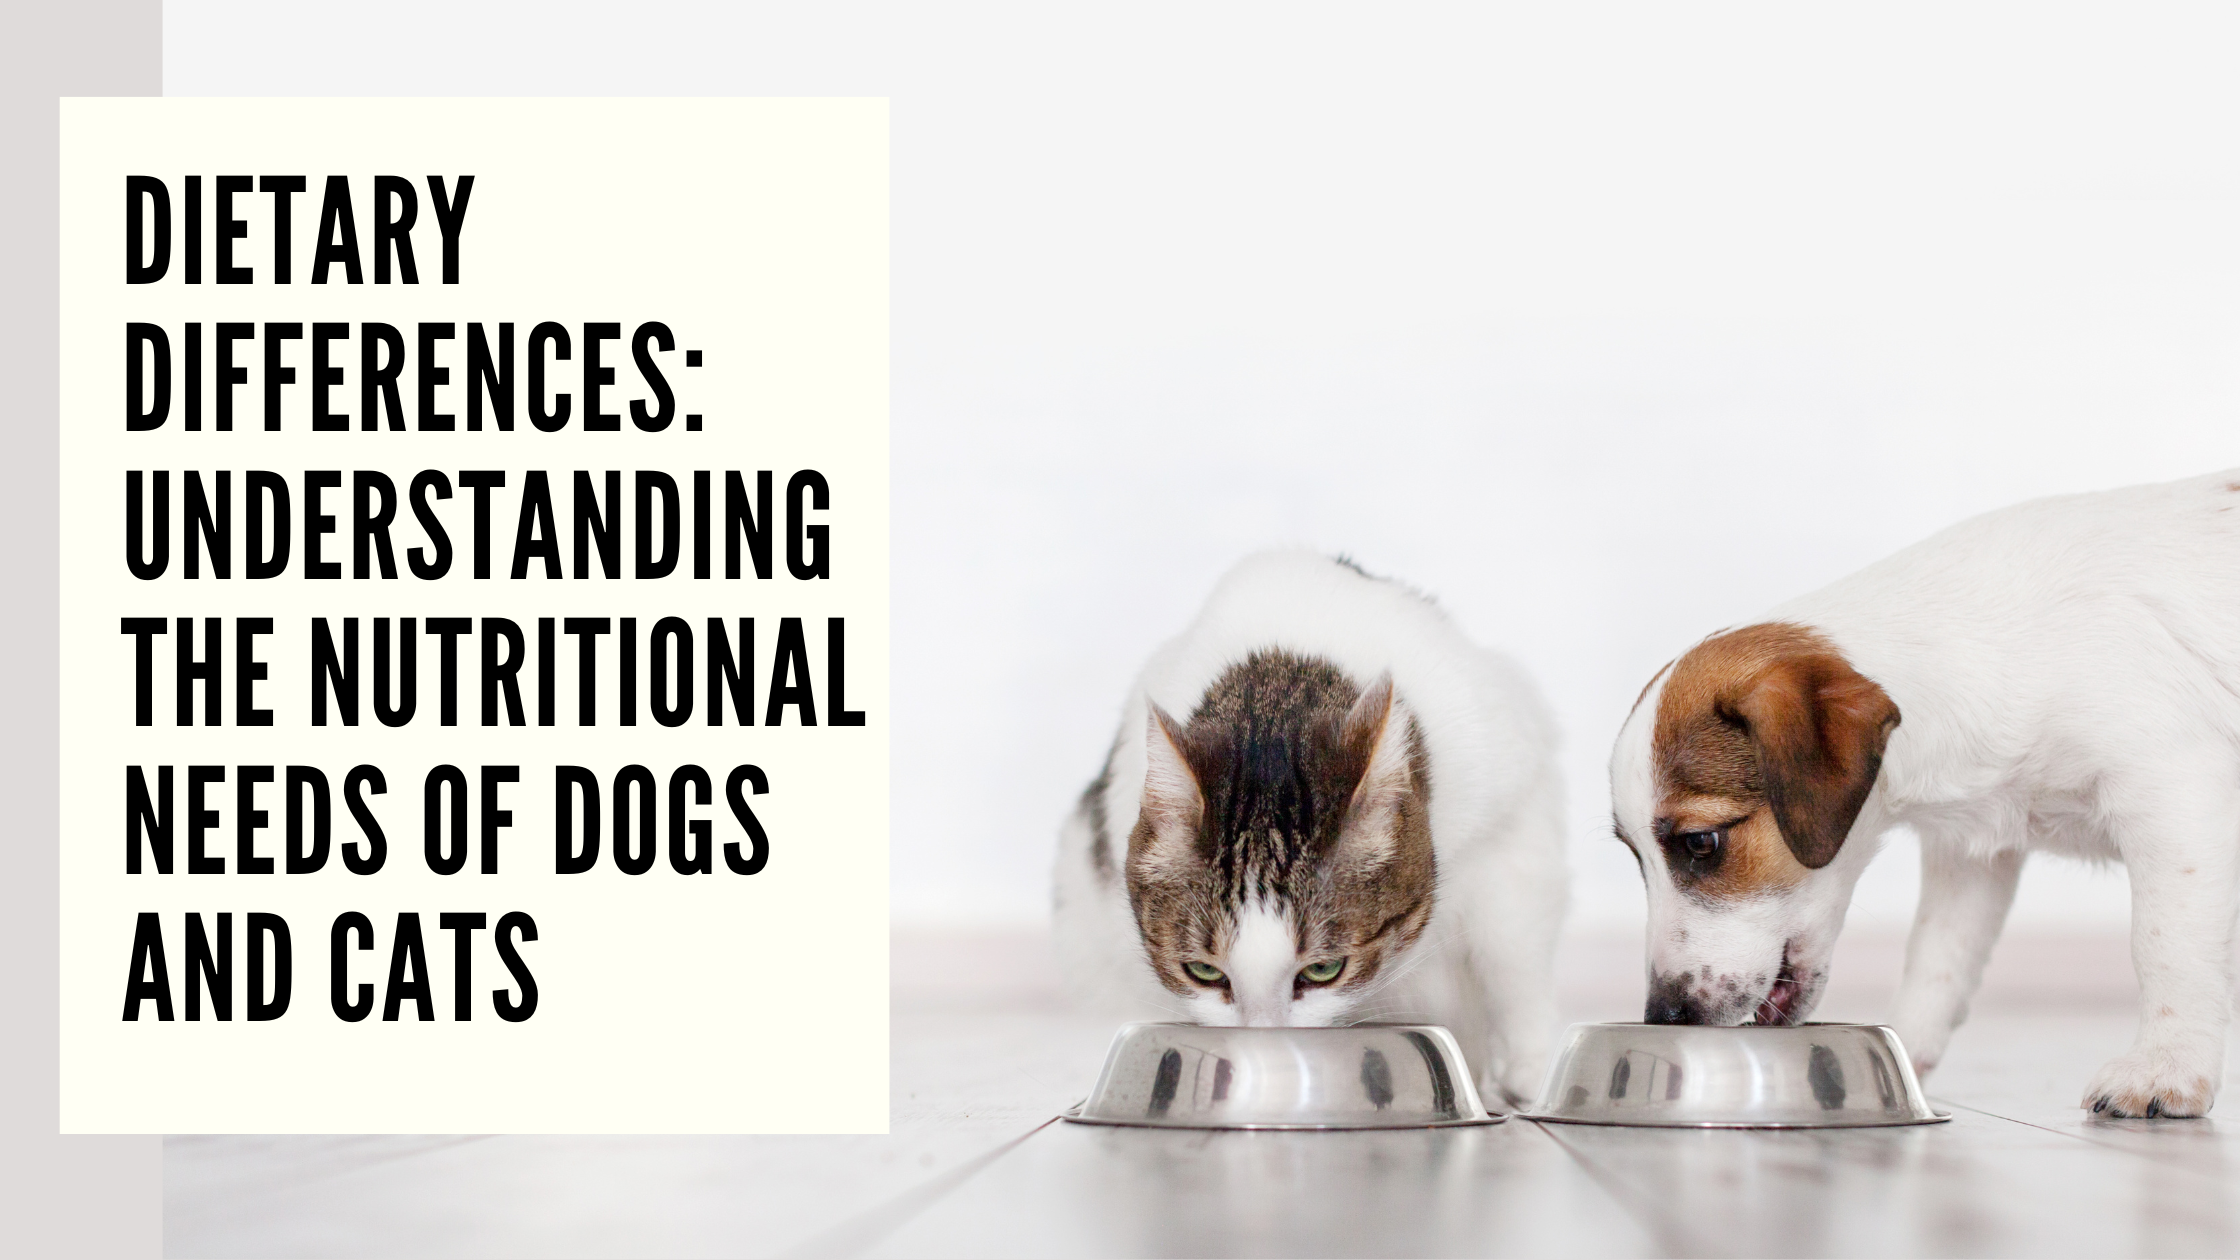 Dietary Differences Understanding the Nutritional Needs of Dogs and Cats